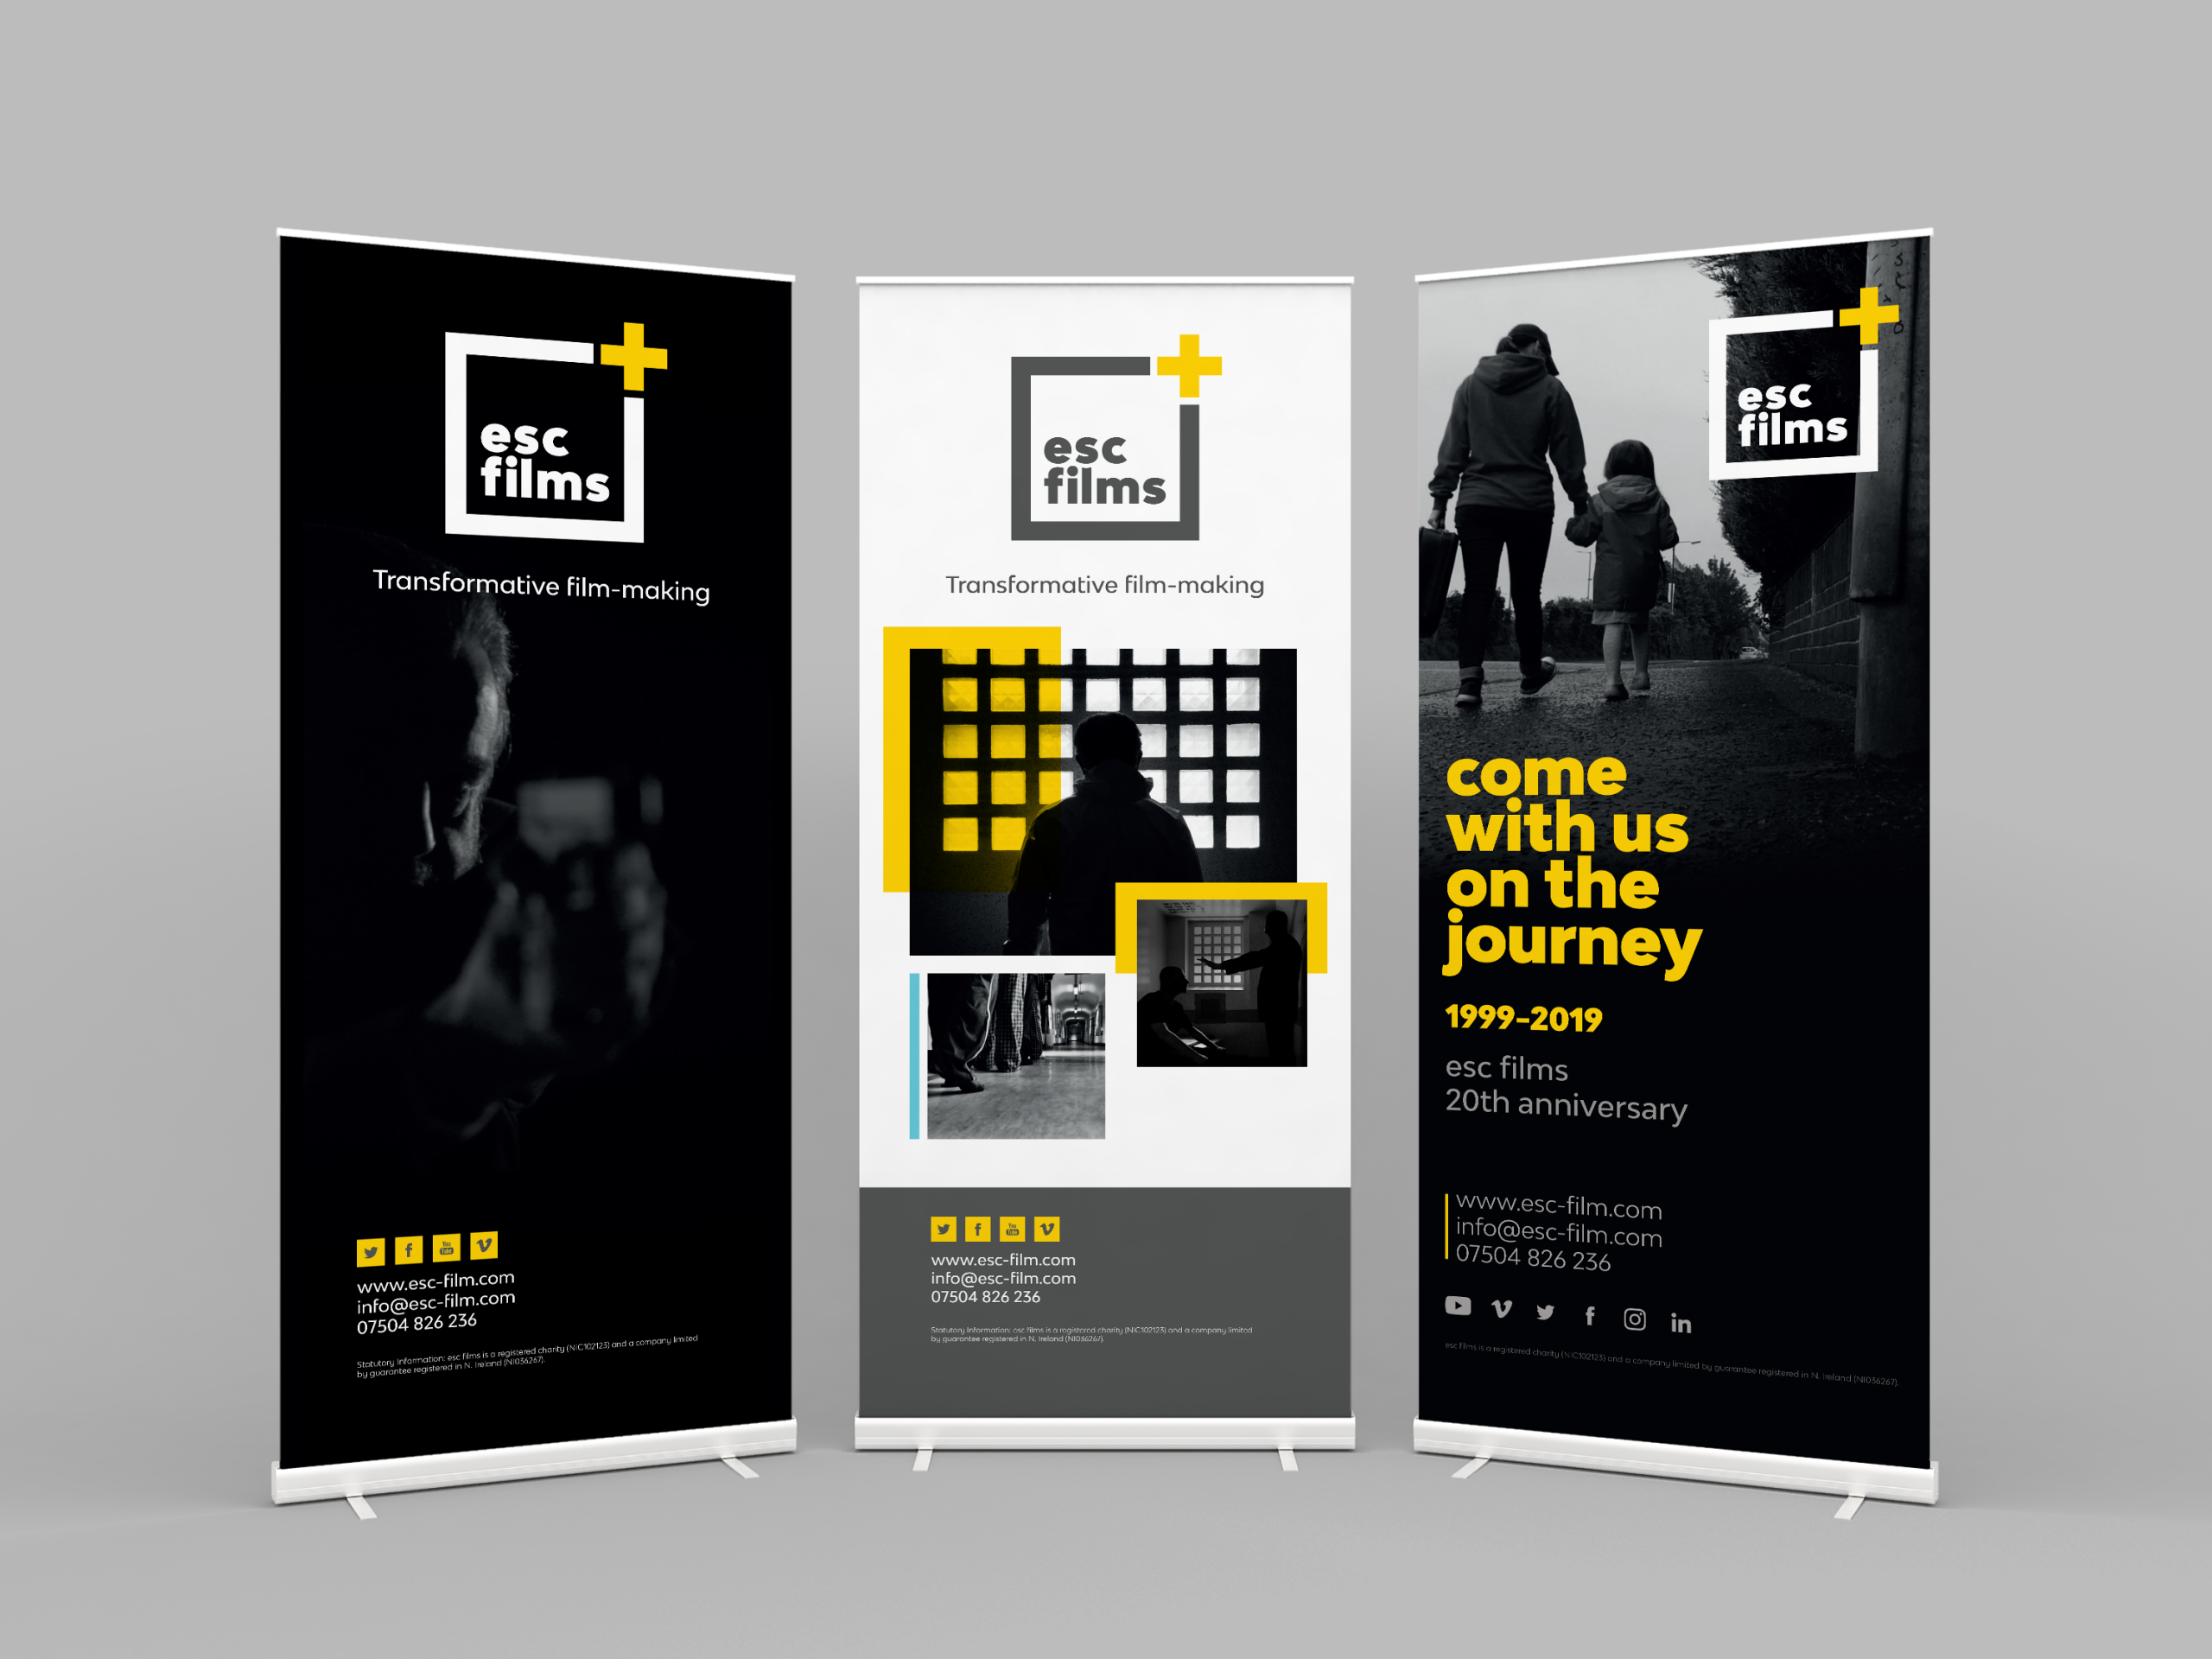 Three roll up banners, advertising events for esc films